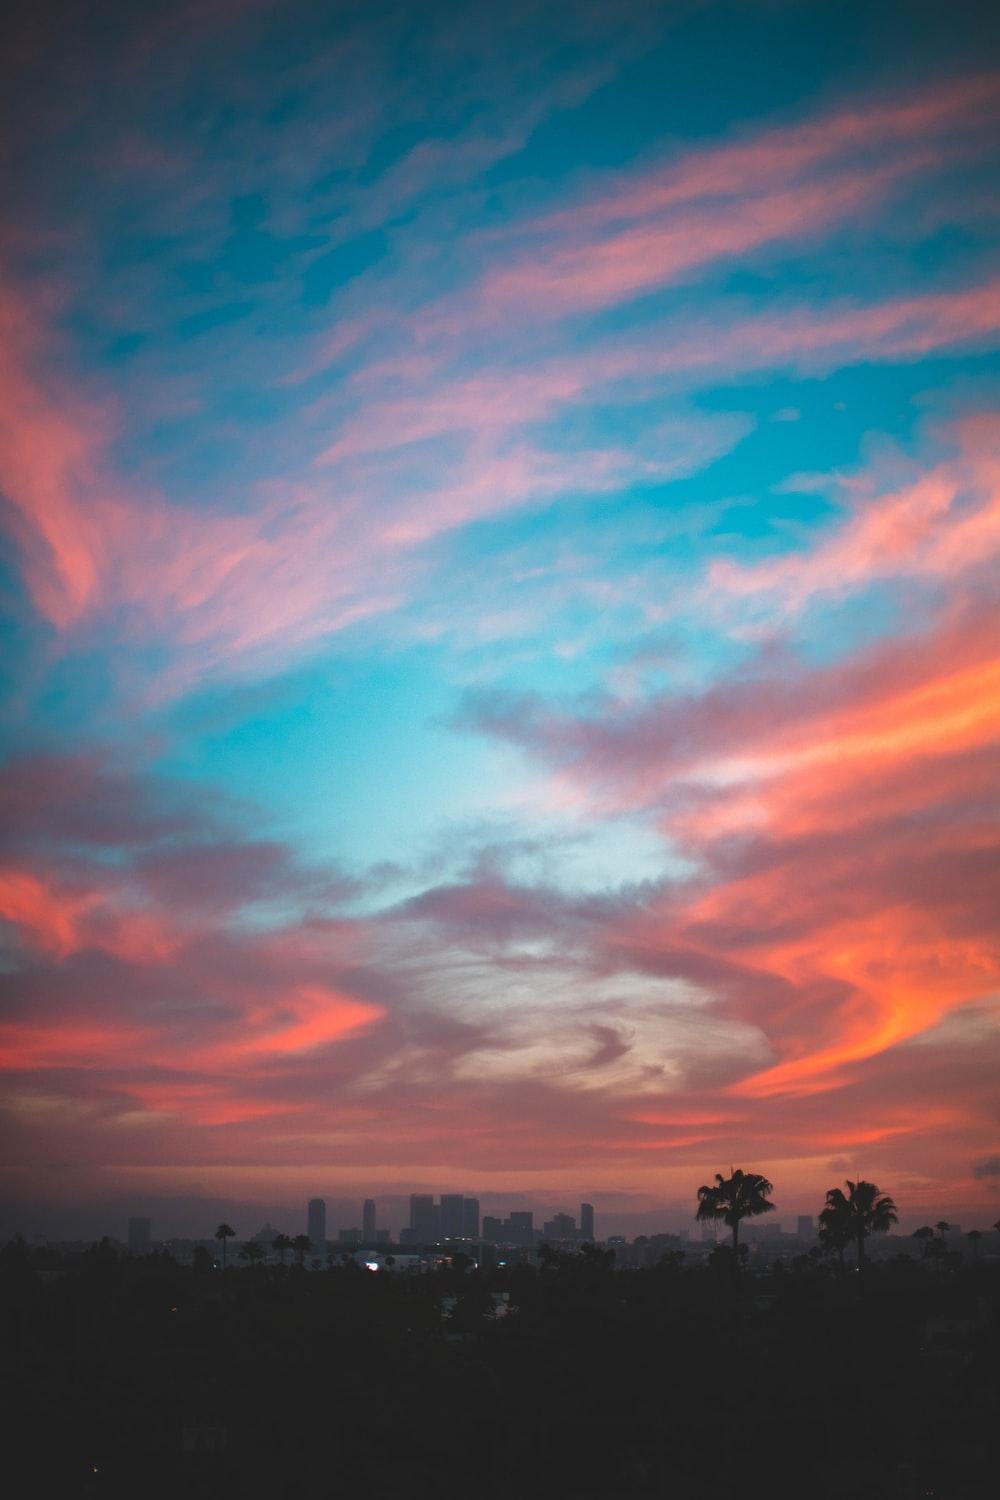 Sunset Cloud Picture [Stunning!]. Download Free Image